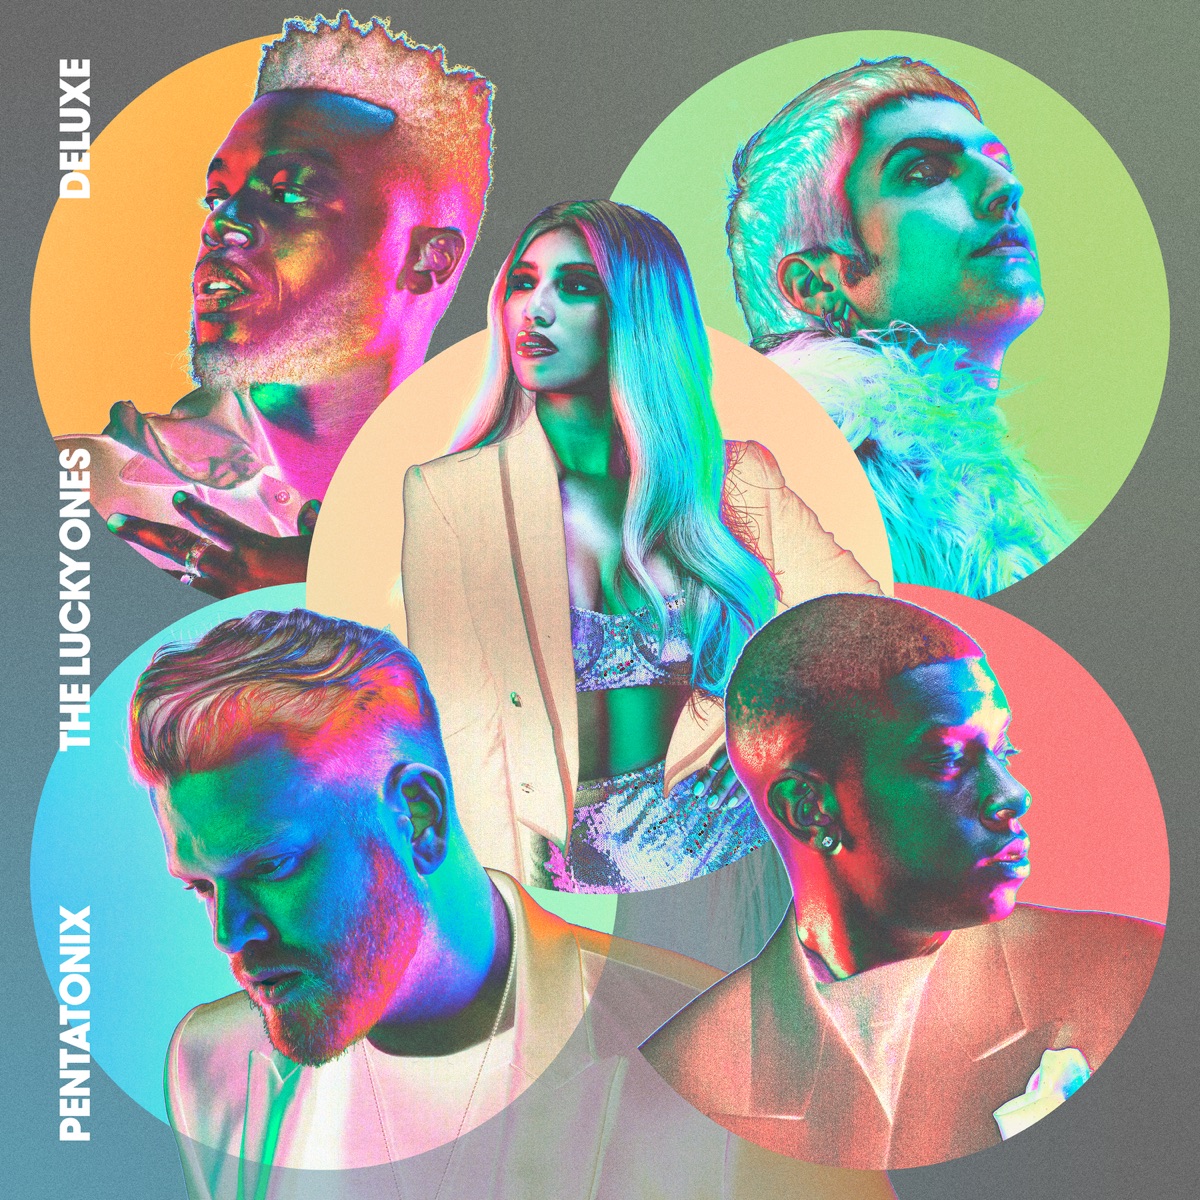 Cover for『Pentatonix - Midnight In Tokyo (feat. Little Glee Monster)』from the release『The Lucky Ones』